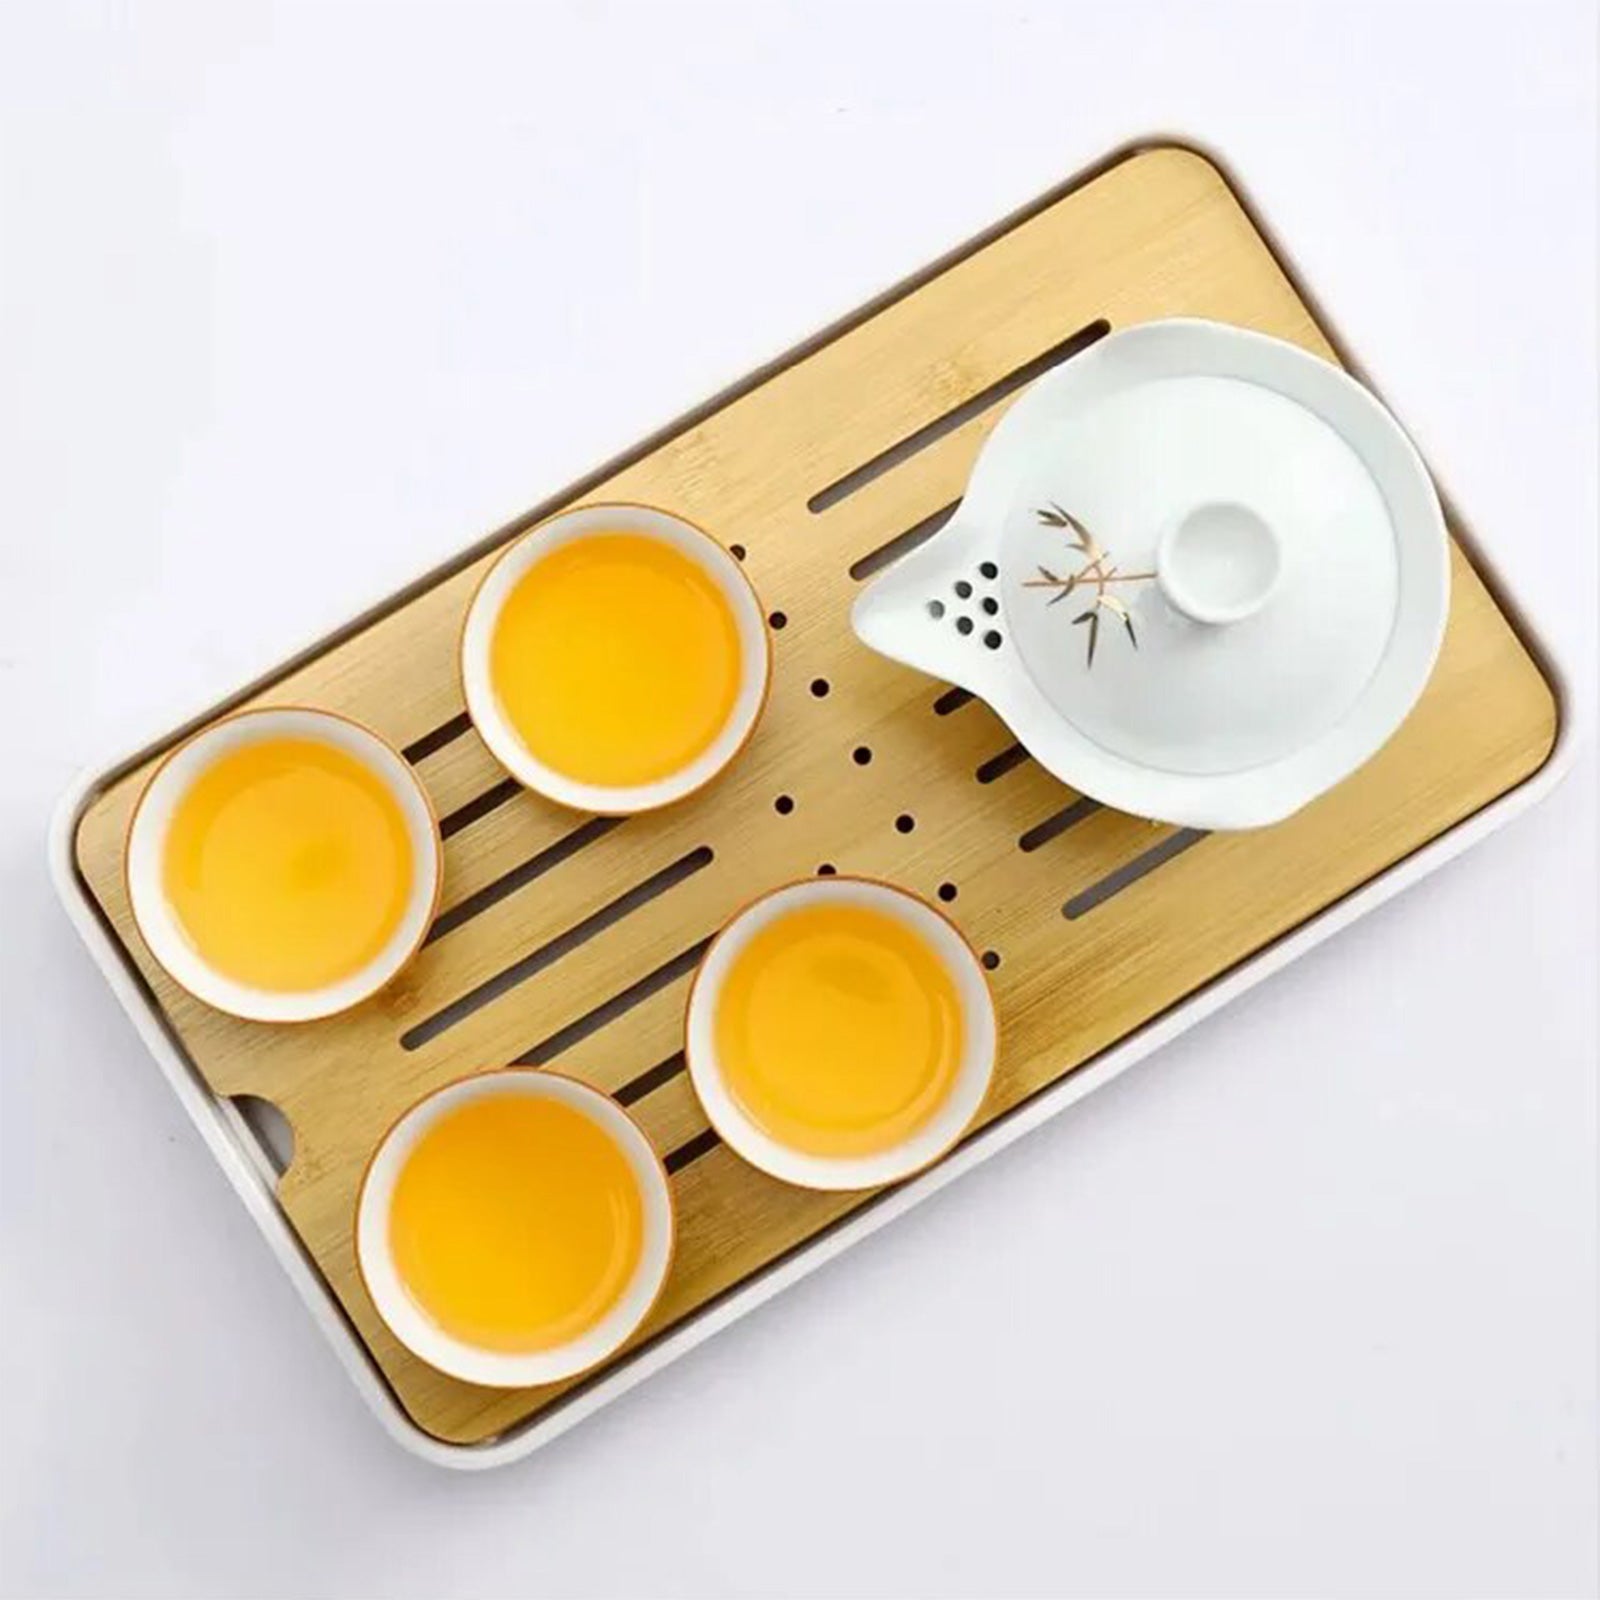 Deluxe Chinese Tea Set With Travel Suitcase